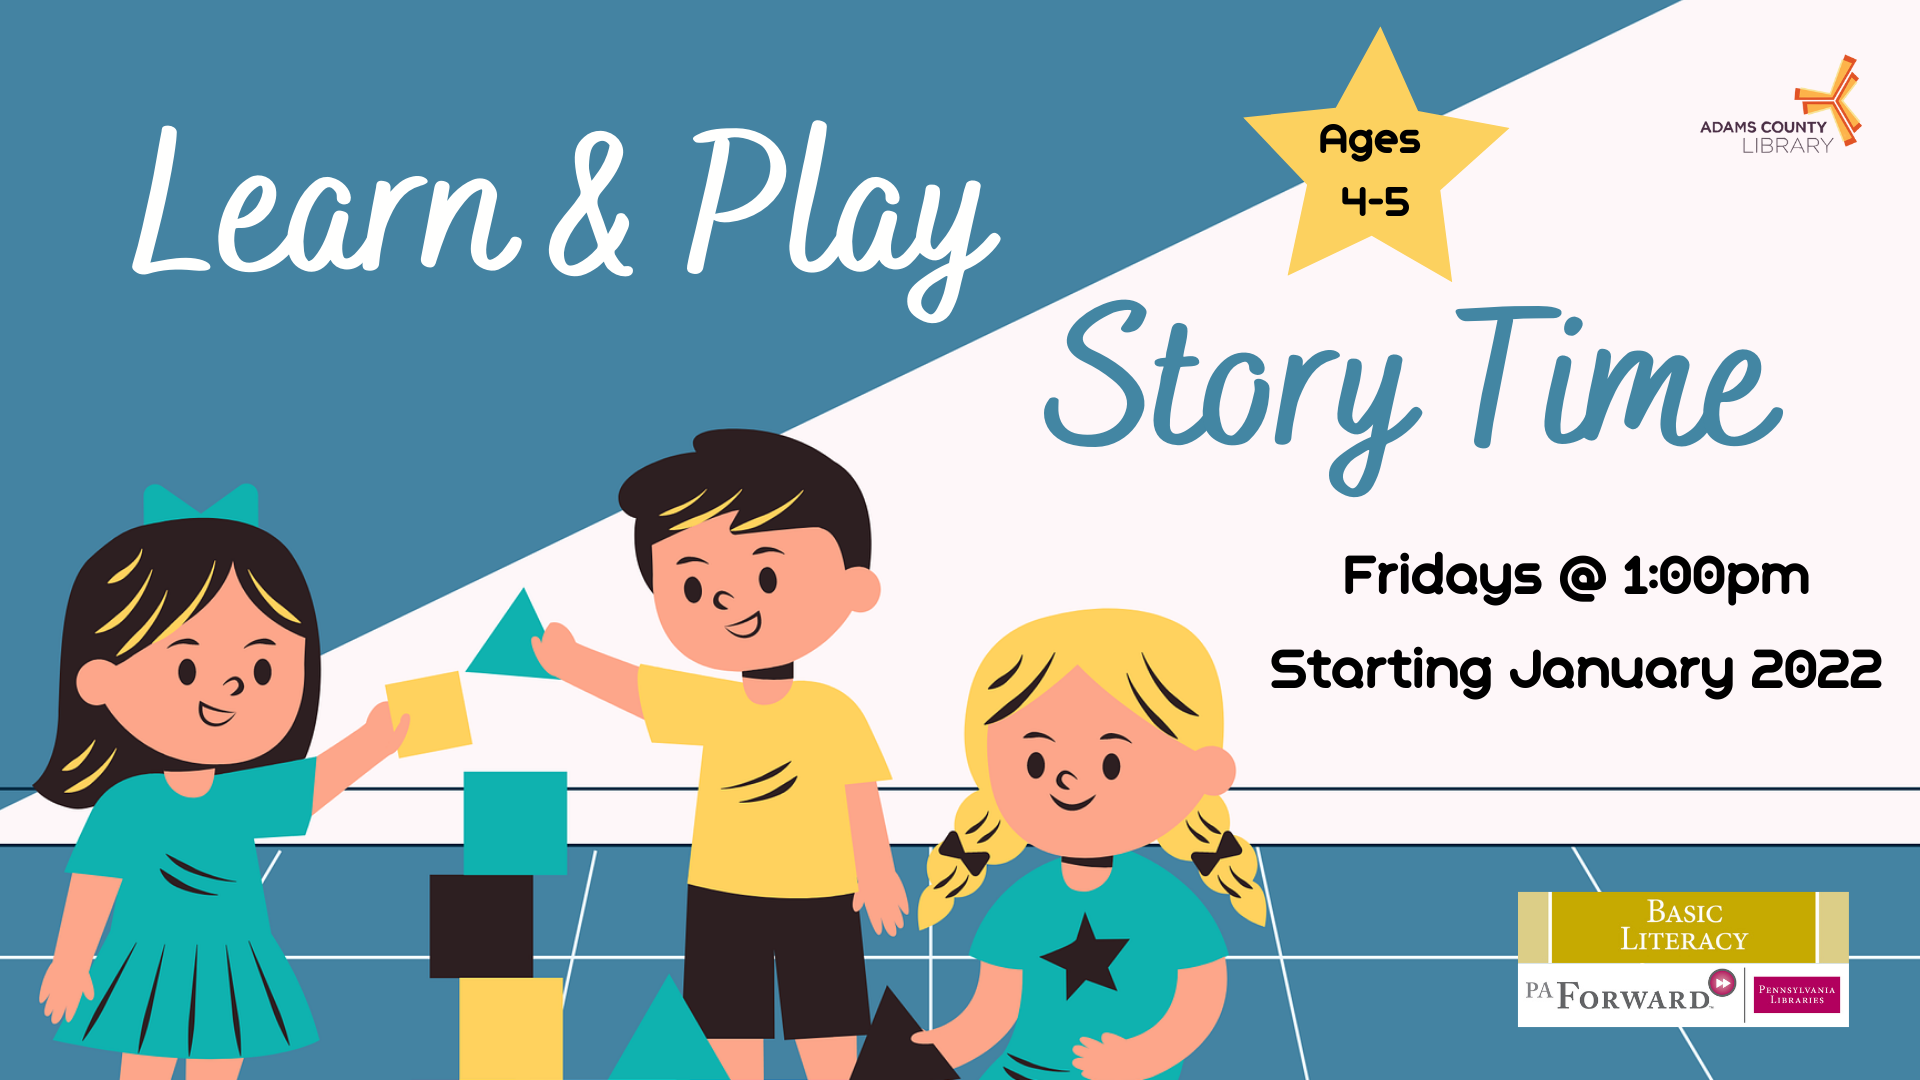 Join us on Fridays at 1:00pm starting January 2022 for a special story time with activies designed to prepare your child for kindergarten. For ages 4-5.